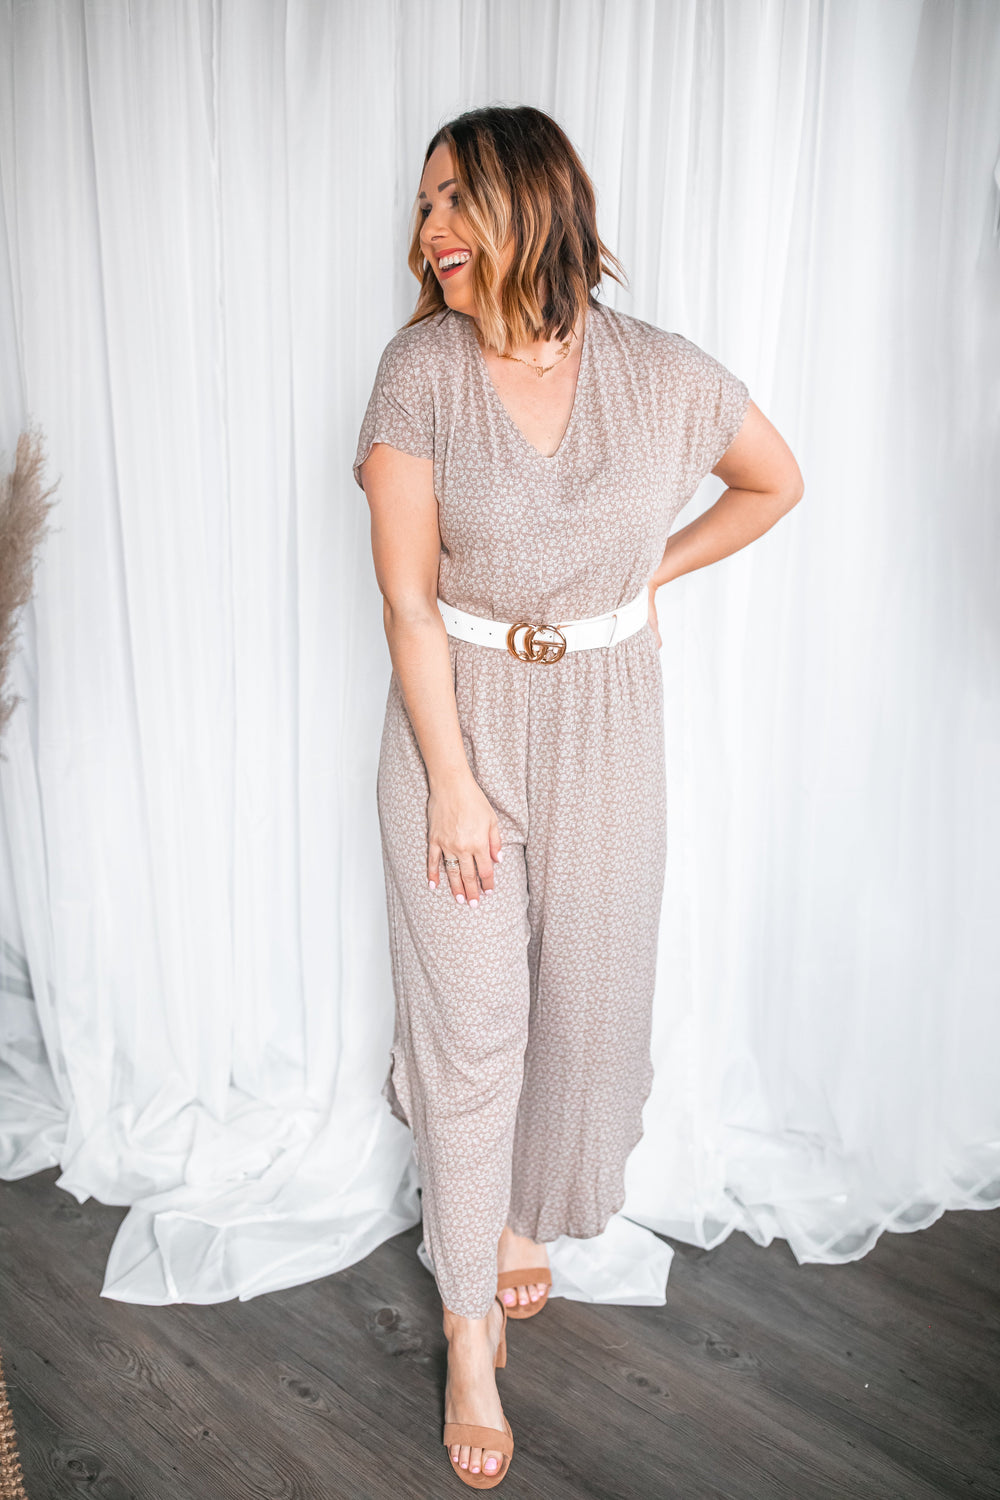 One Eleven Olive Boutique The Oakley Jumpsuit The Oakley jumpsuit is perfect for this spring and summer! Belt it with one of our belts and pair with sandals or heels depending on if dressing up or down! The back